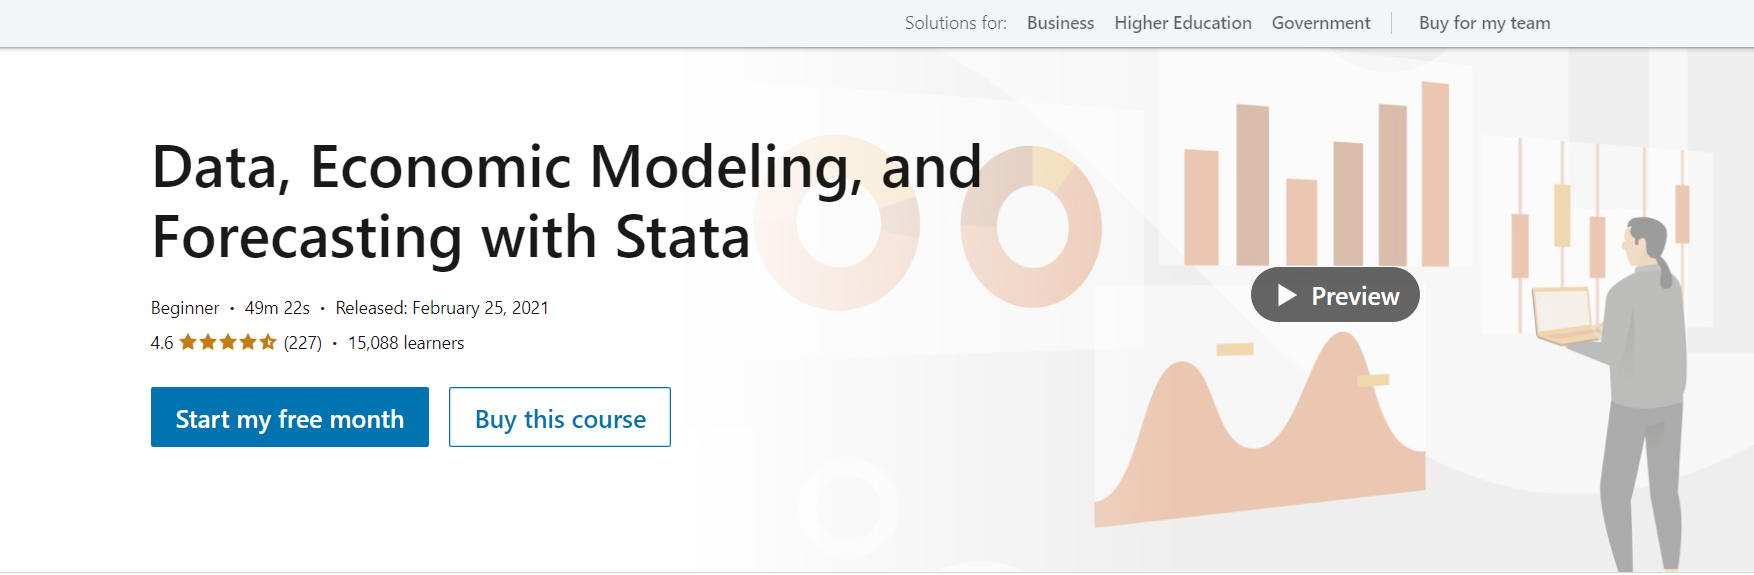 Data, Economic Modeling, and Forecasting with Stata